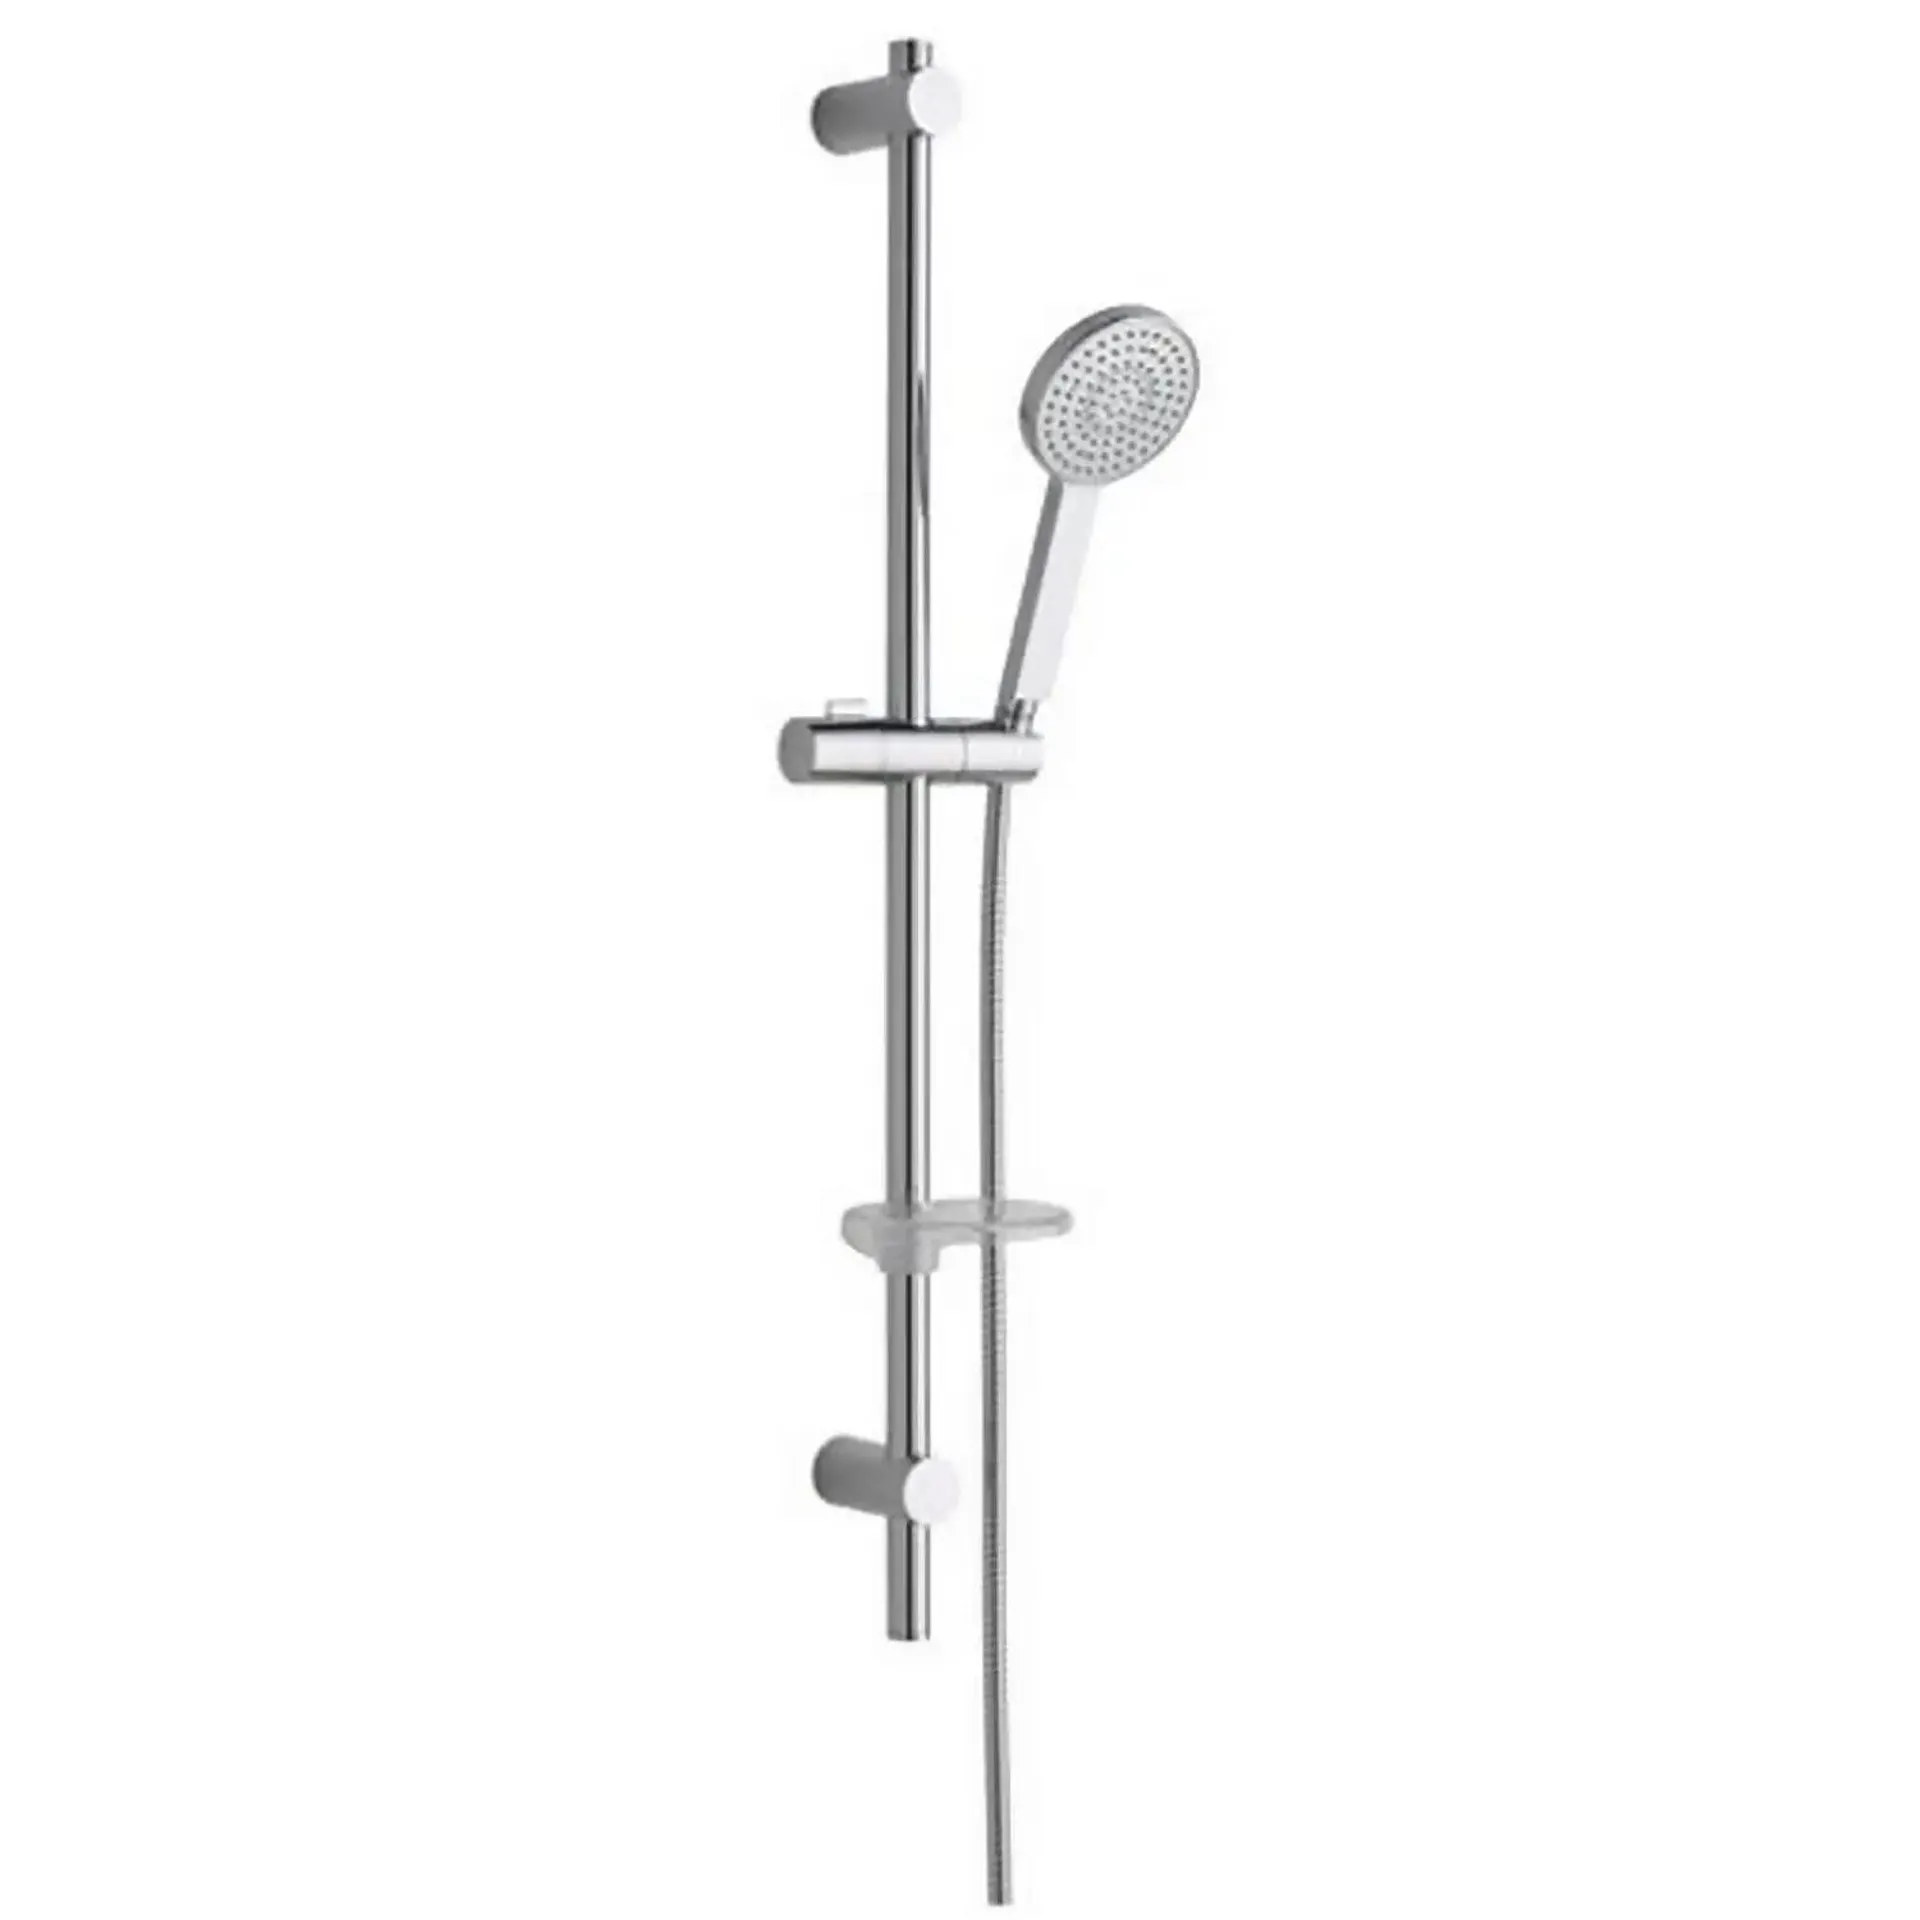 Pure Airdrop 105mm Multi Function Shower Head and Riser Rail Kit - Chrome